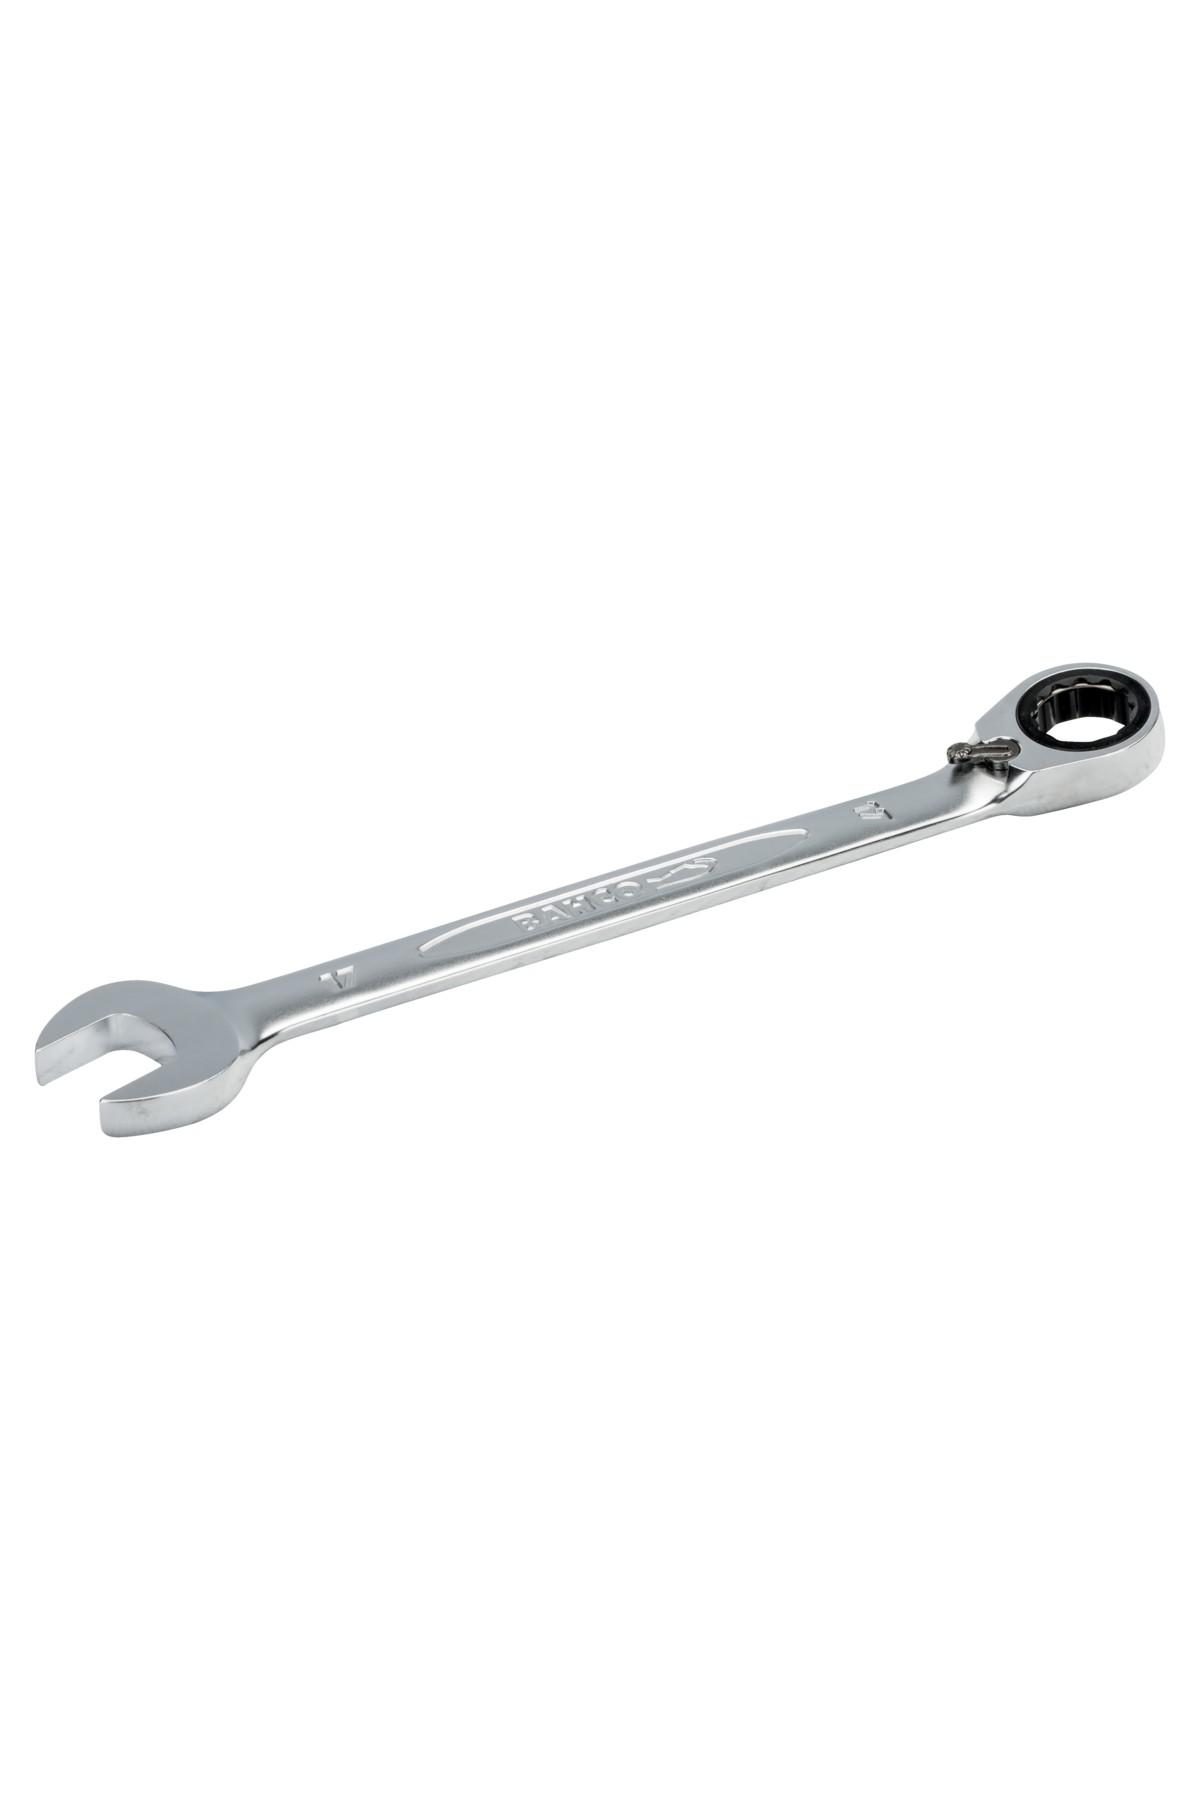 Ratchet wrench 13mm